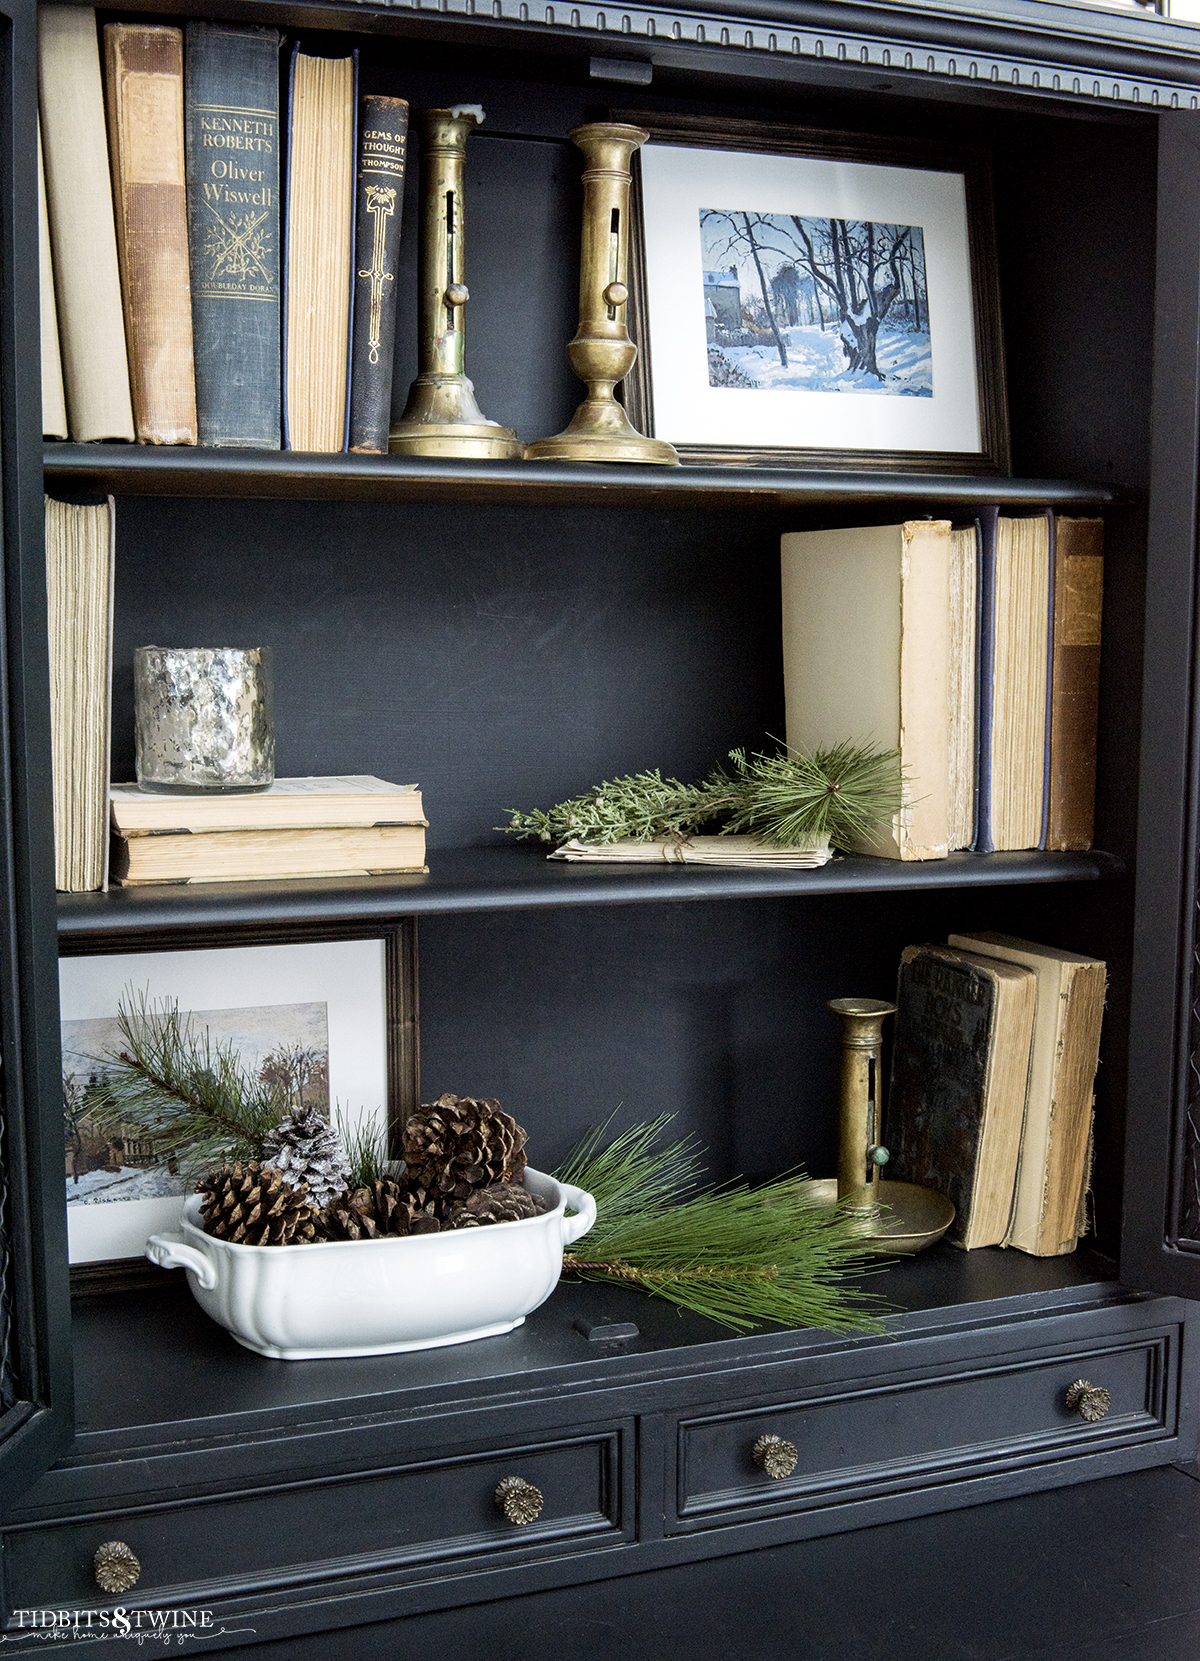 black cabinet with shelves styled for winter decor with vintage books brass candle sticks and evergreens